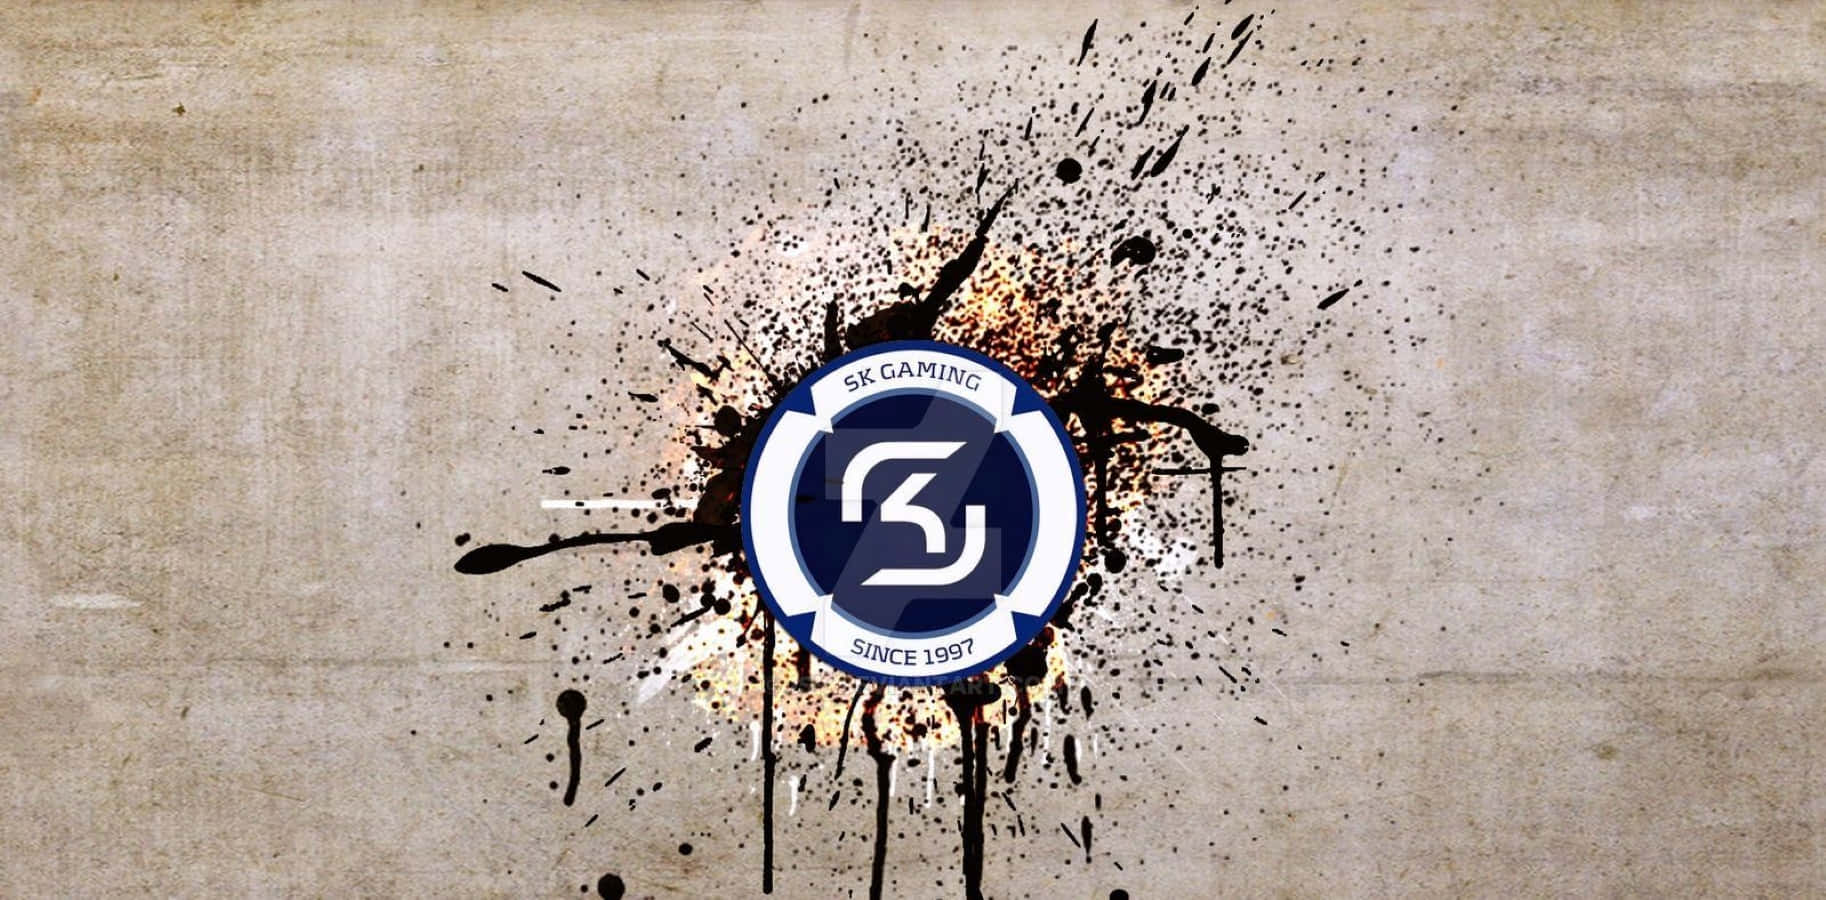 SK Gaming in action - Experience thrilling esports competition Wallpaper